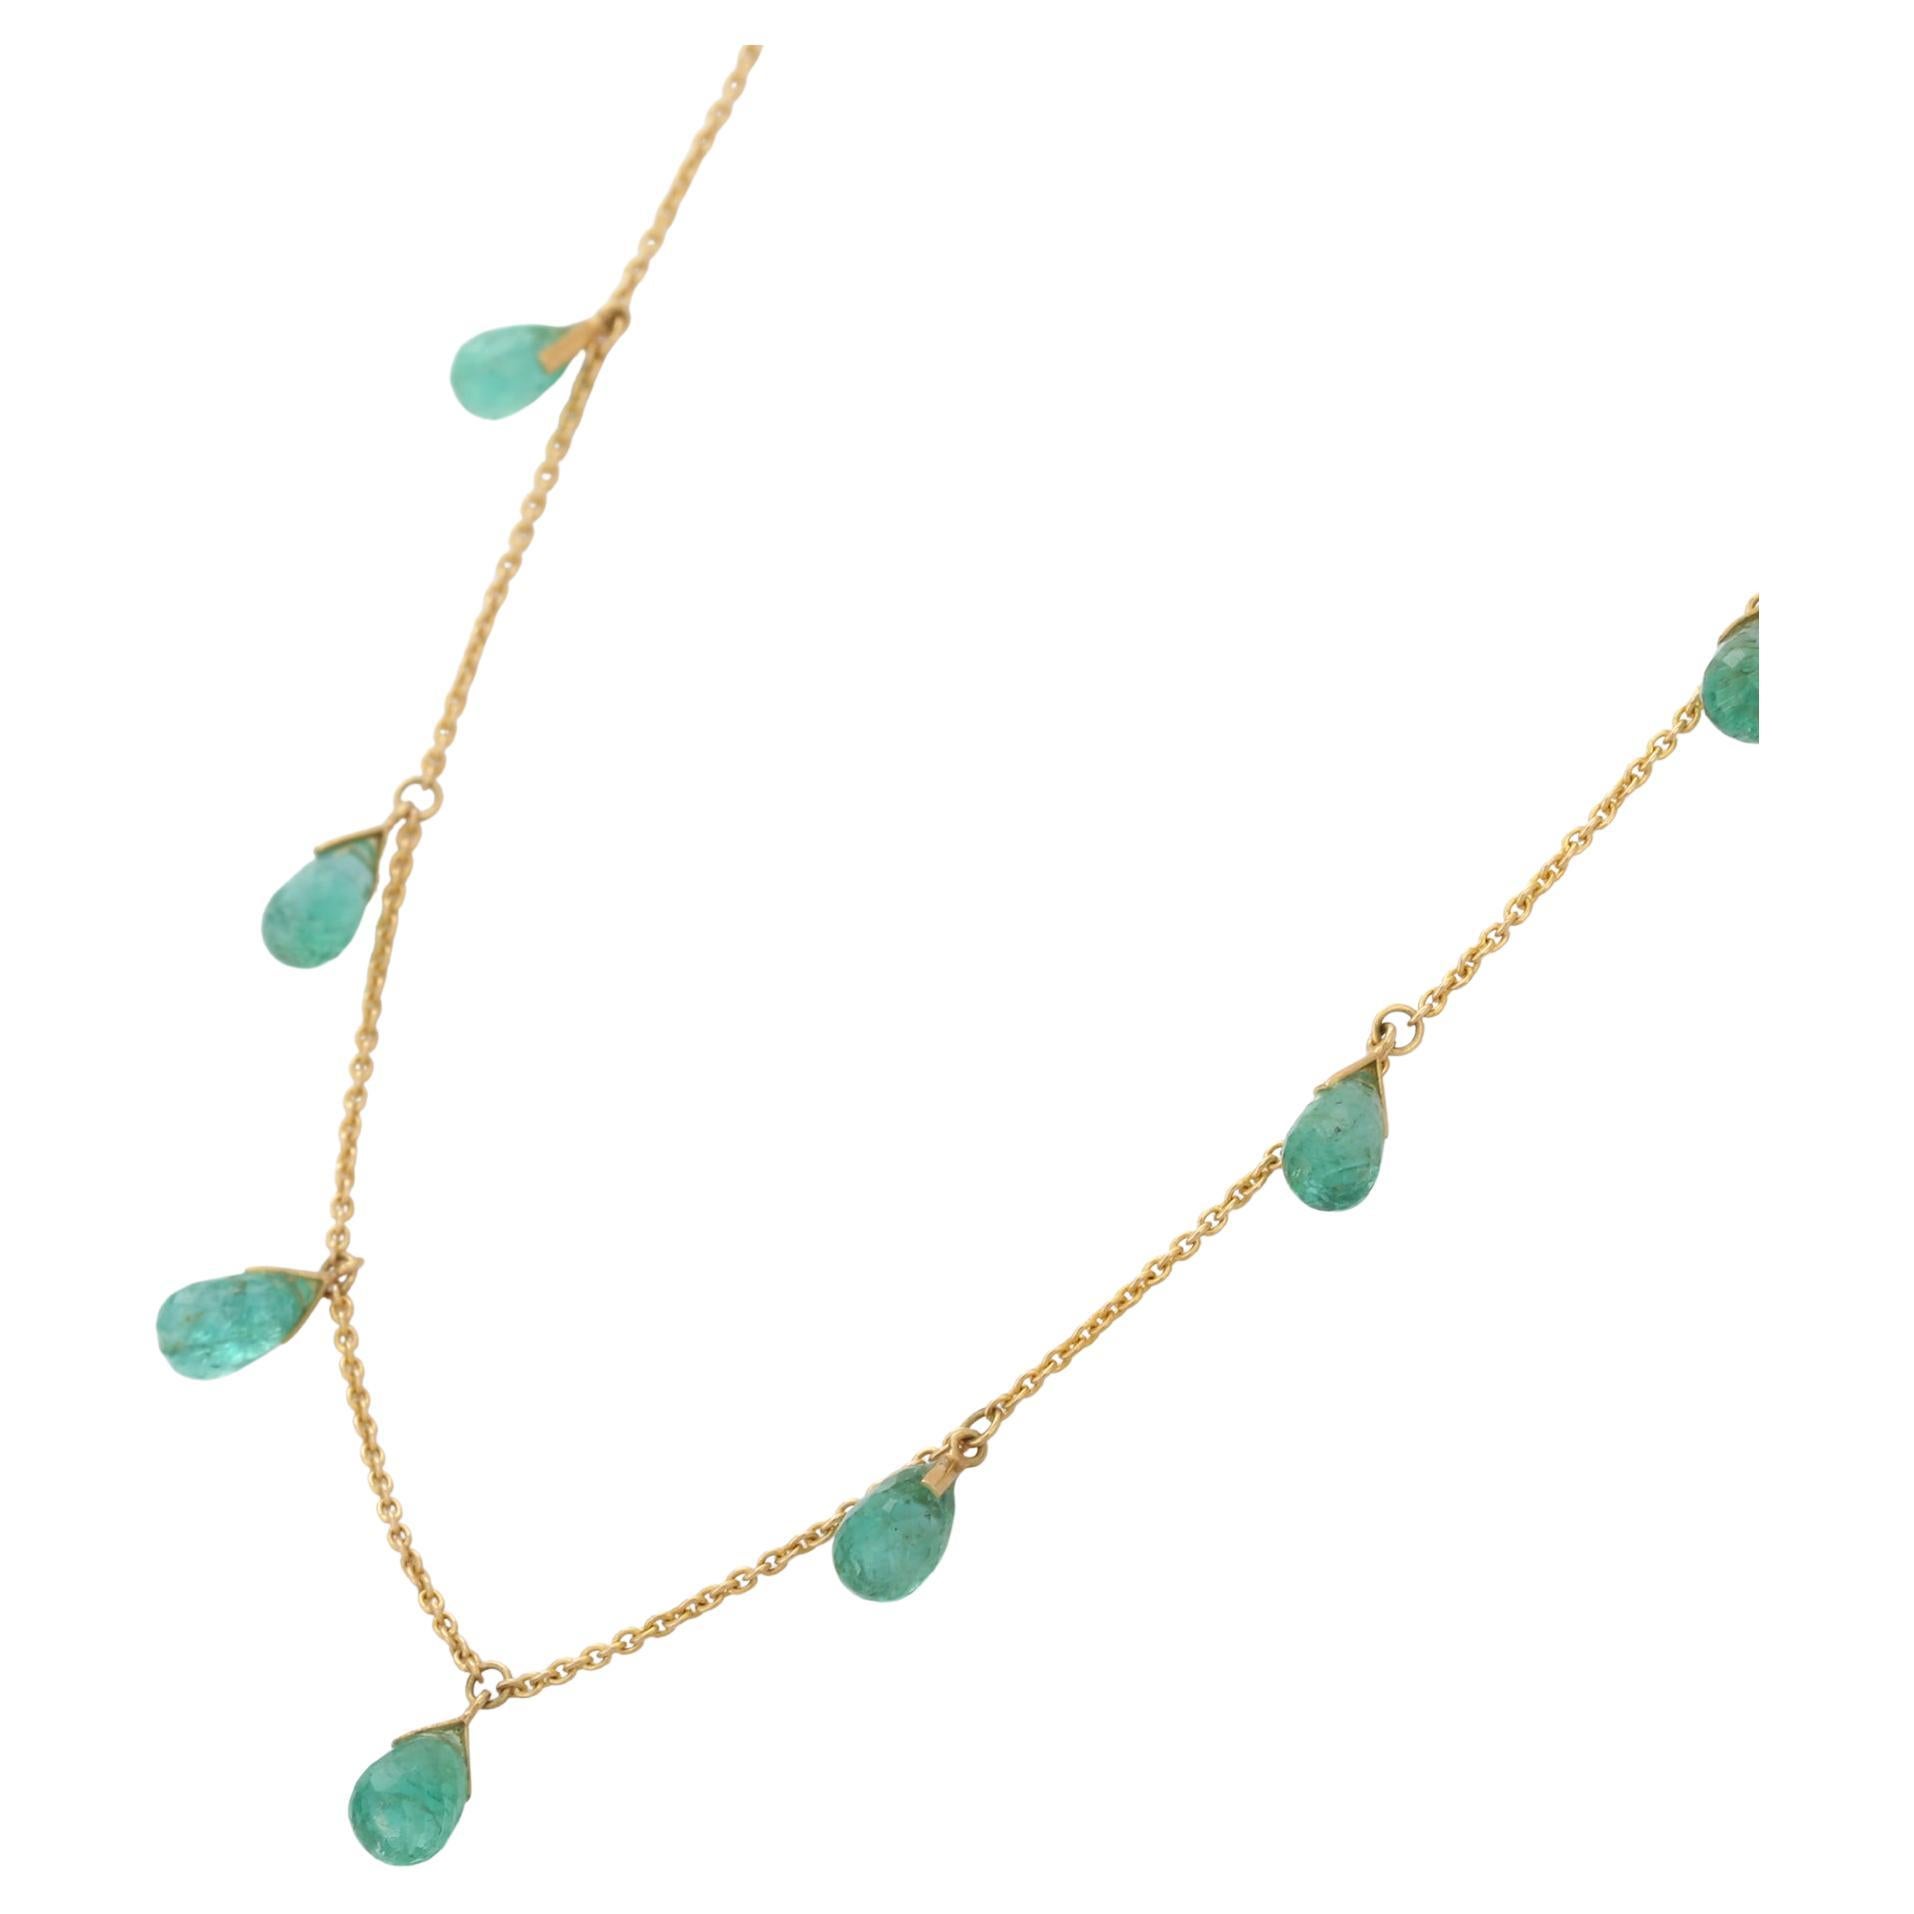 Emerald Necklace in 18K Gold studded with drop cut emeralds.
Accessorize your look with this elegant emerald drop necklace. This stunning piece of jewelry instantly elevates a casual look or dressy outfit. Comfortable and easy to wear, it is just as